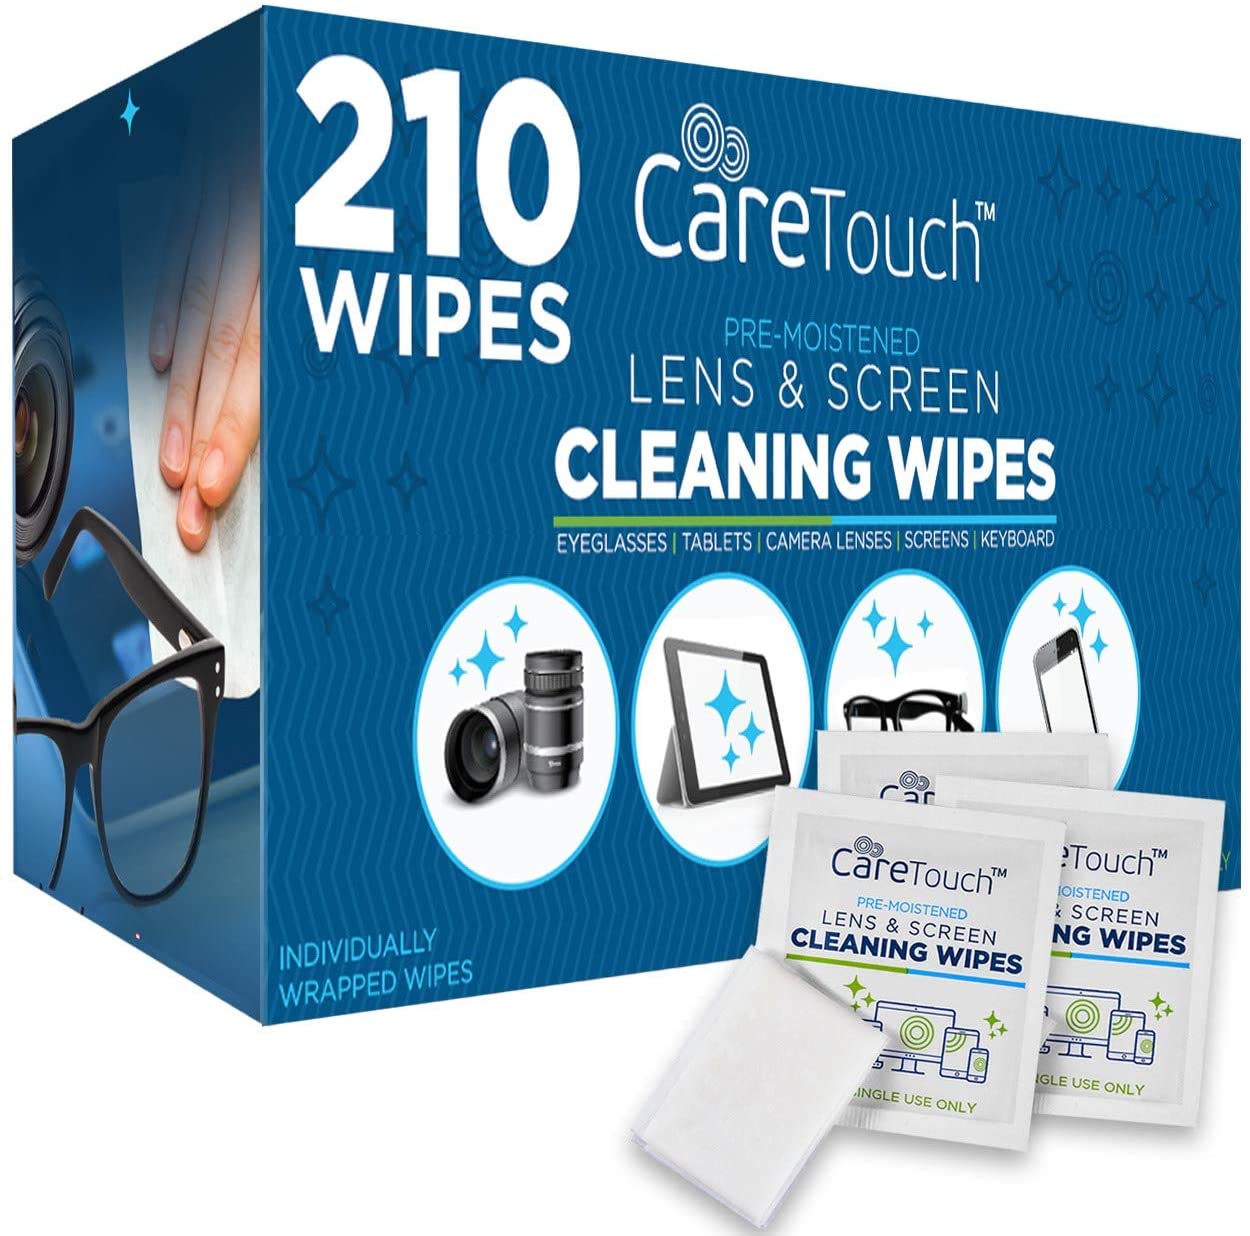 Care Touch Pre-Moistened Lens Screen Cleaning Wipes, 210-Count